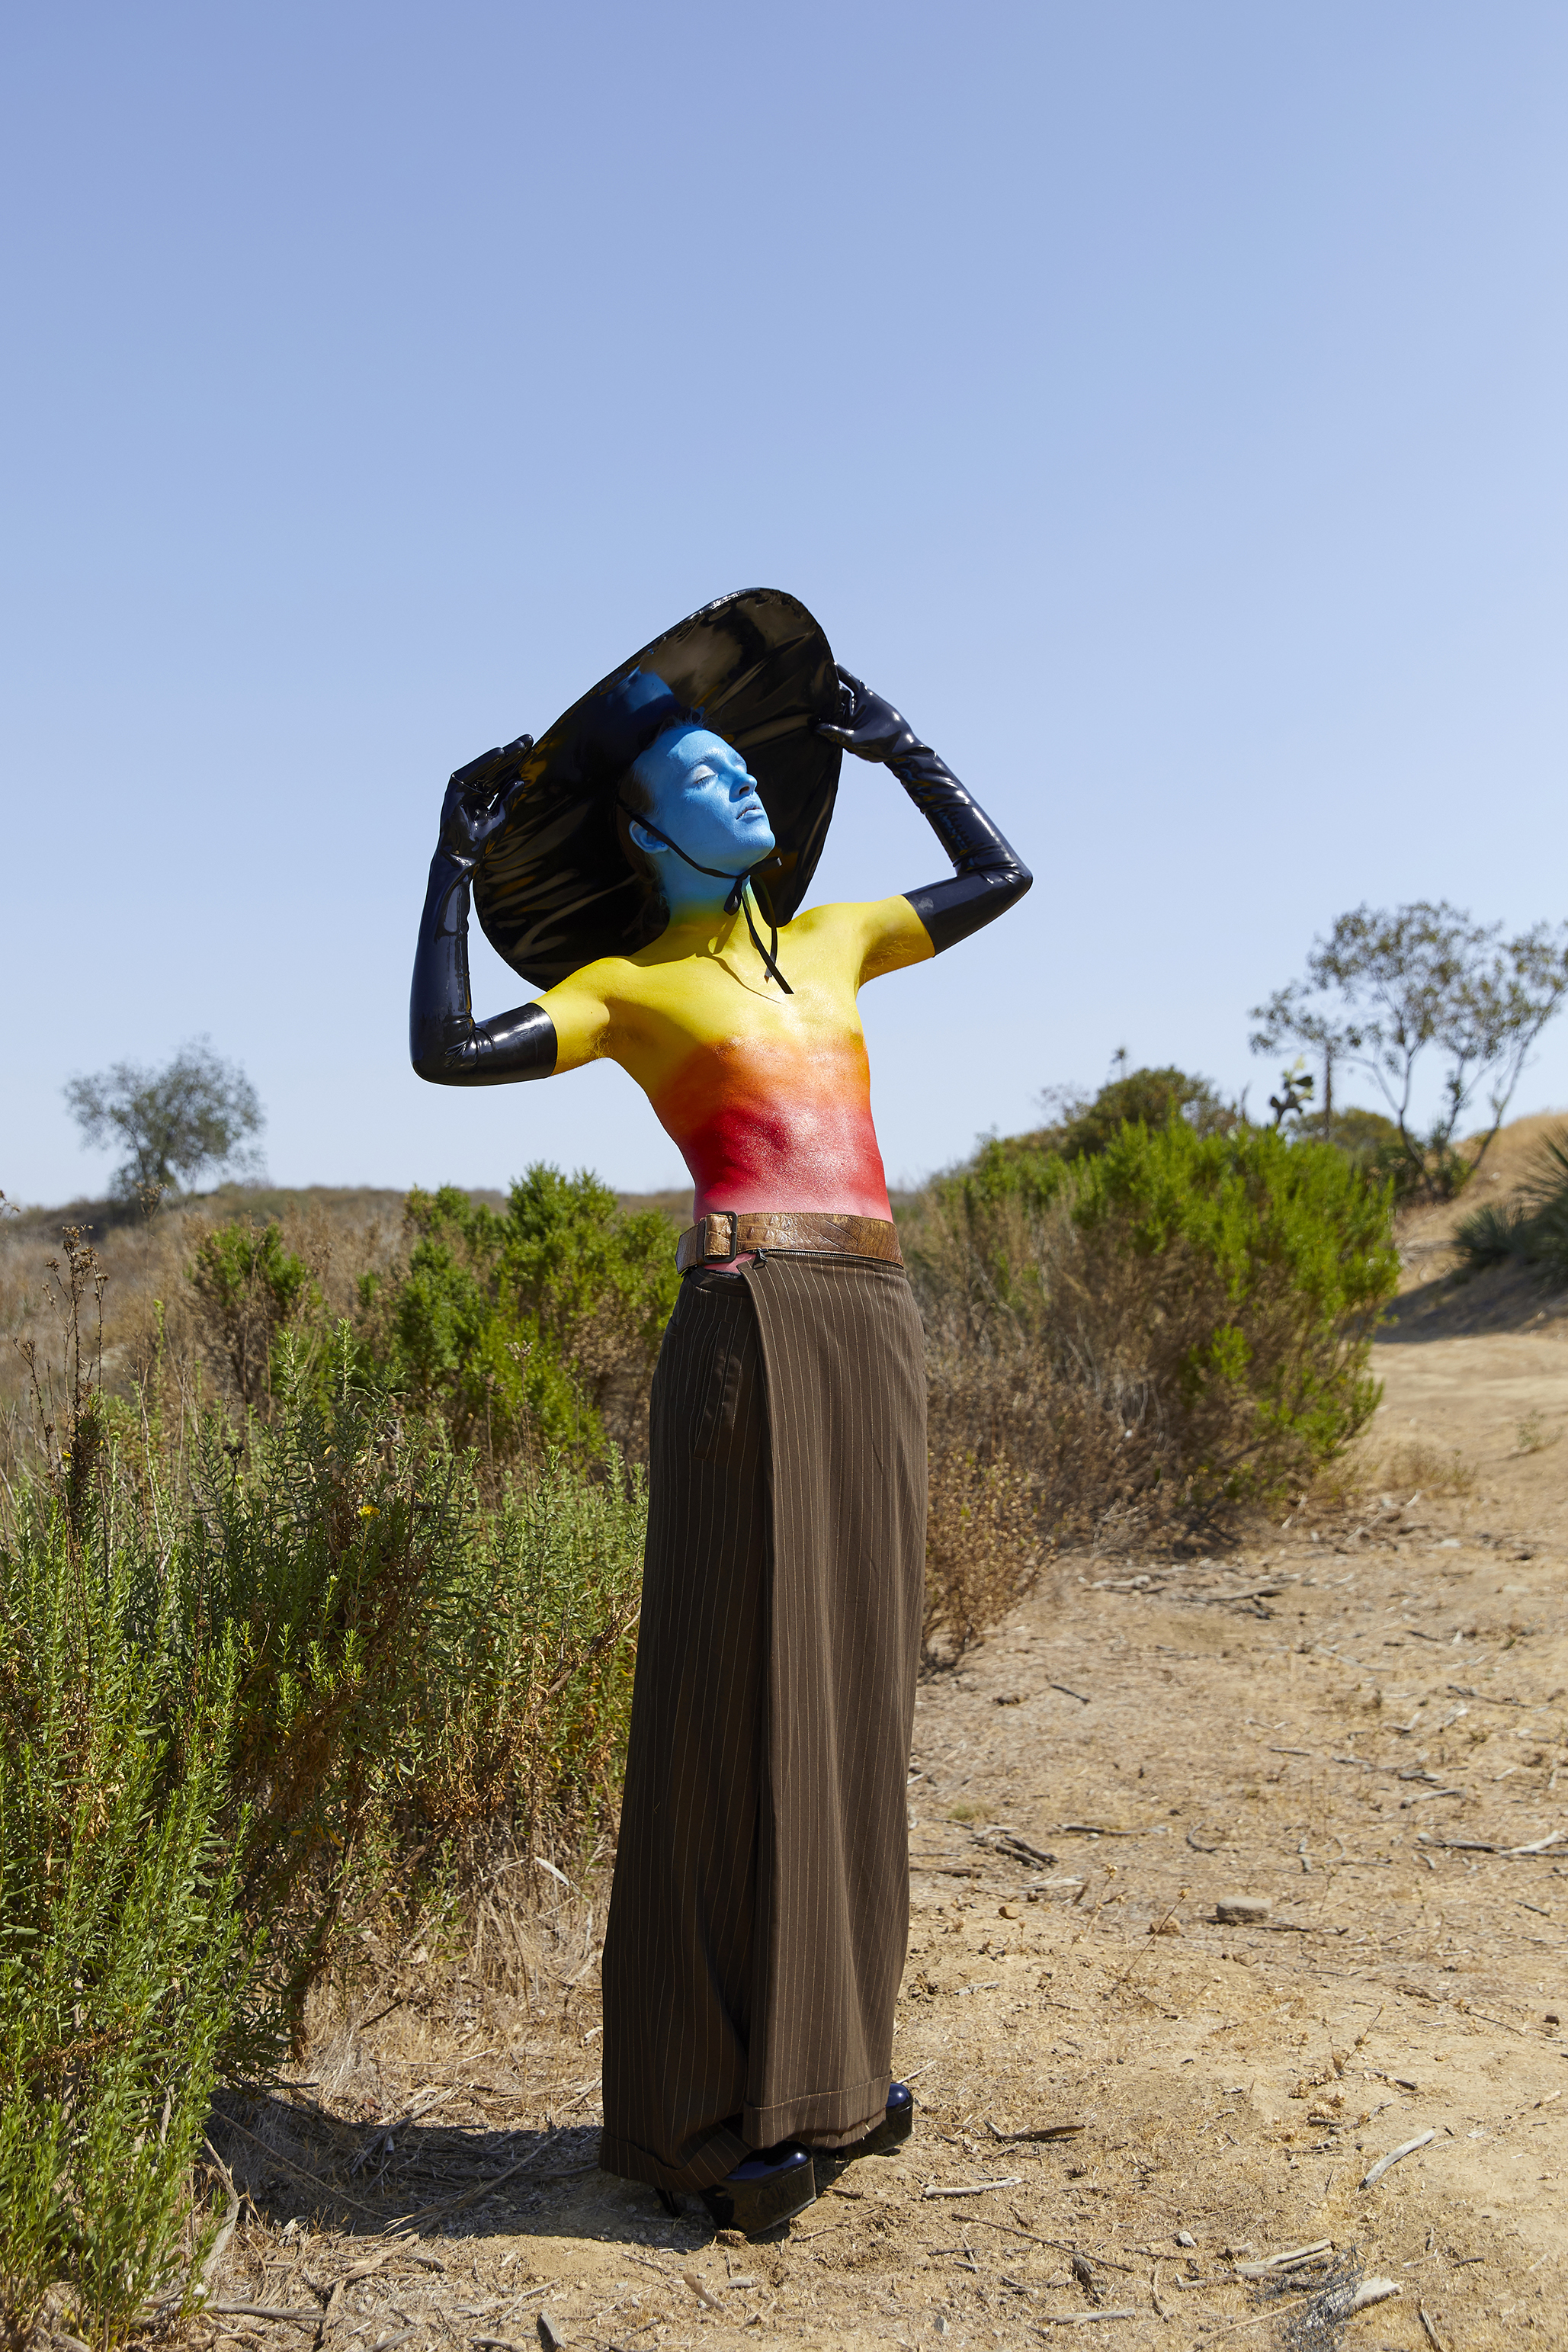 Jesse shirtless with rainbow body paint, latex hat and gloves outside posing